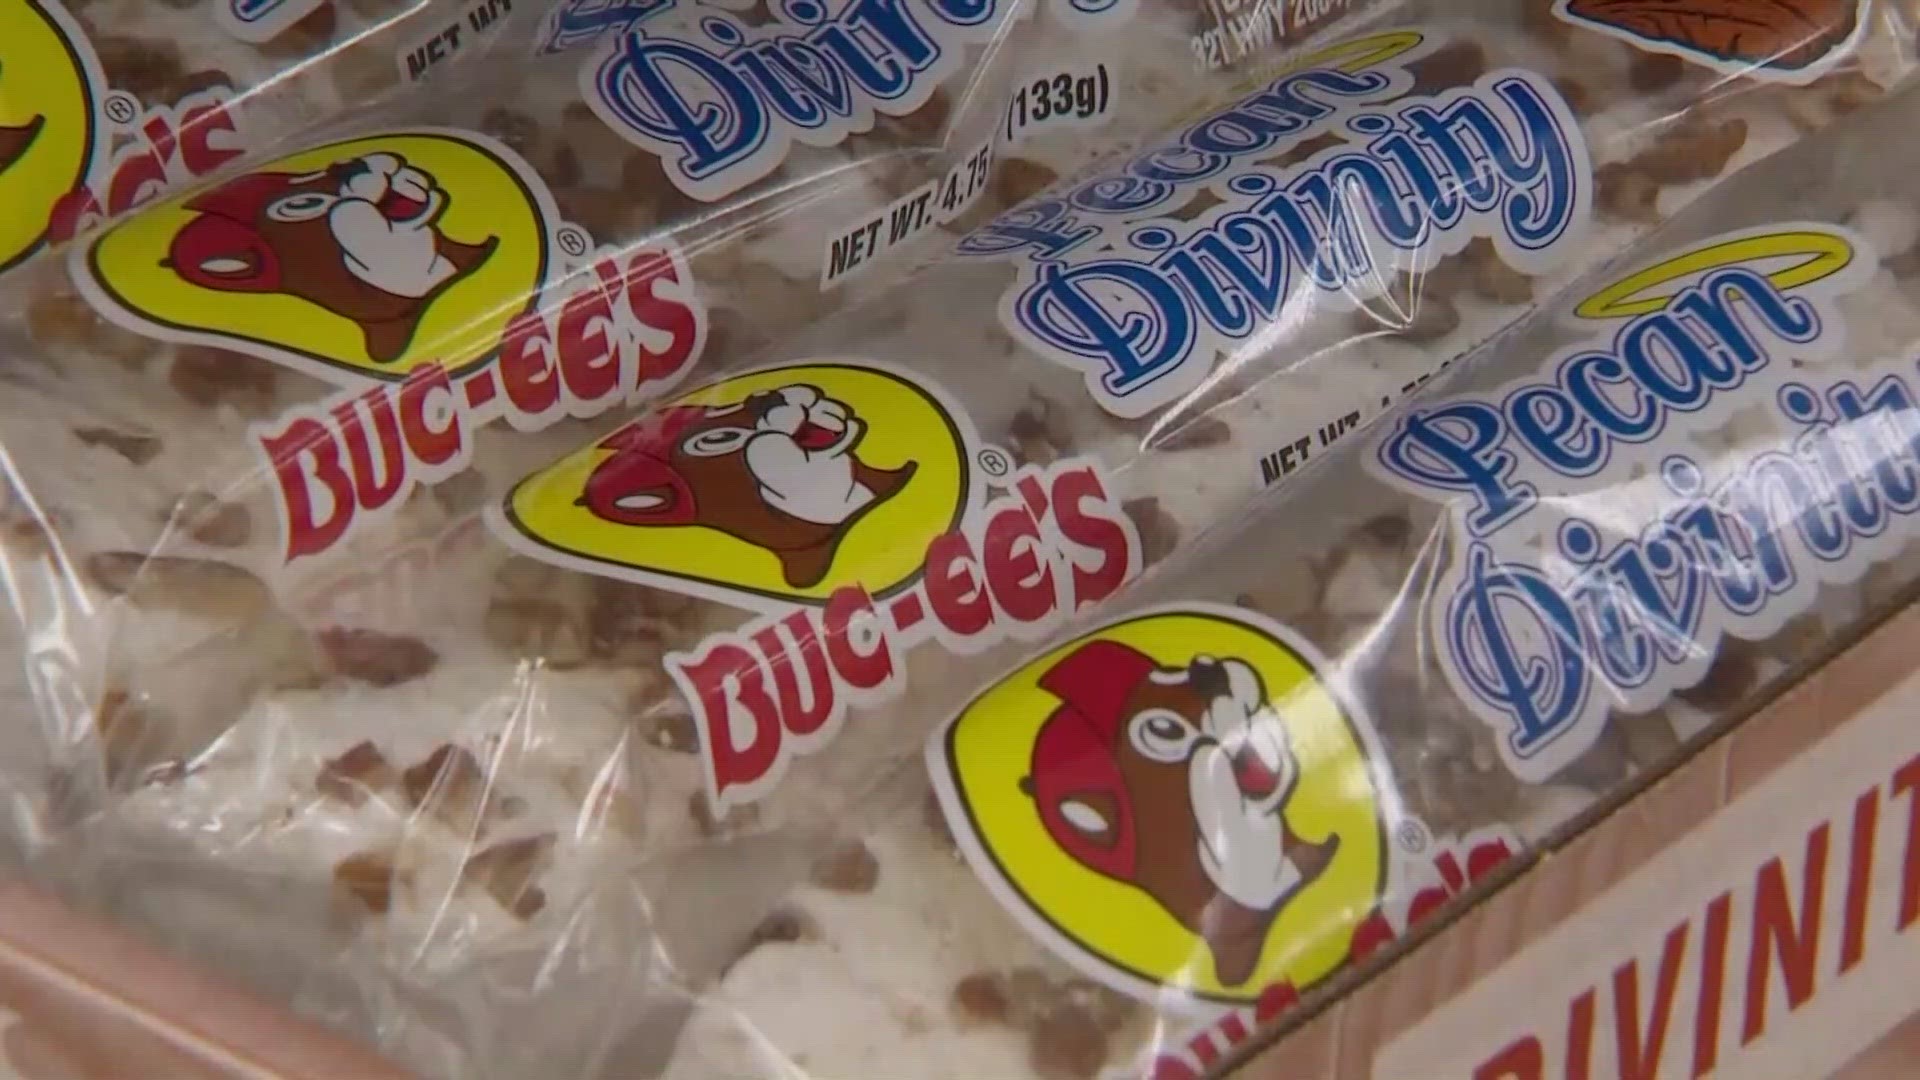 After this new location opens, Buc-ee’s will operate 49 stores across Texas and other southern states.